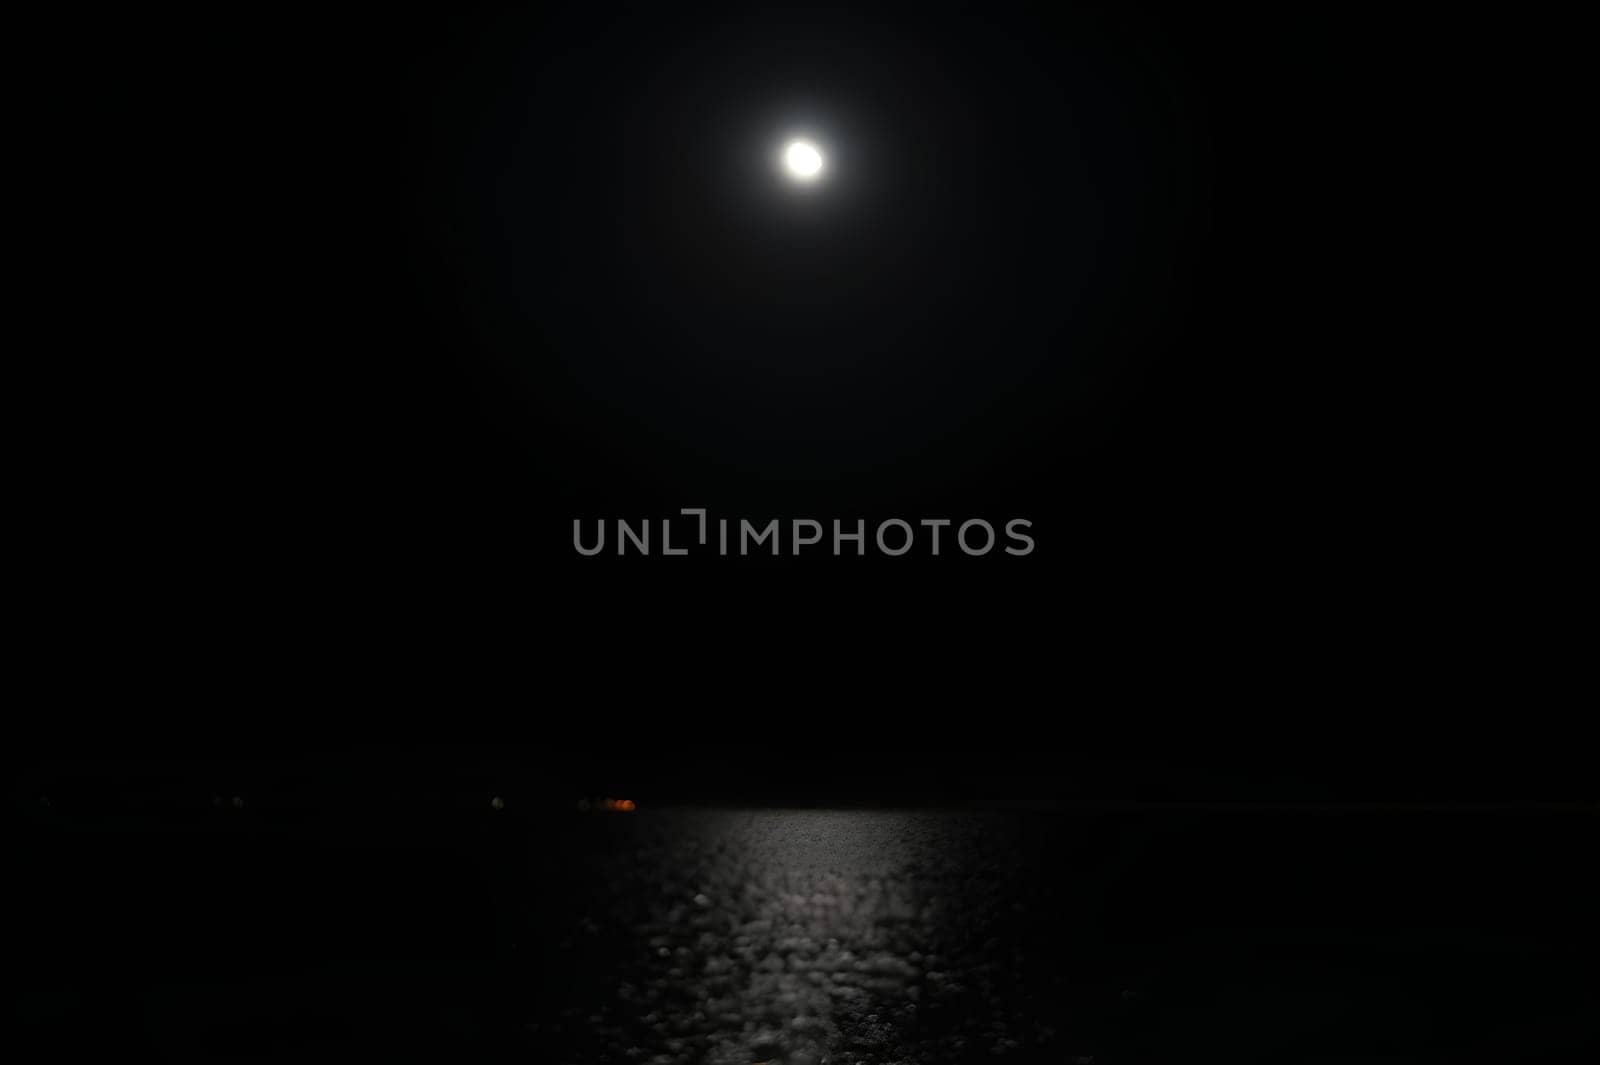 A dark night sky with a full moon and water